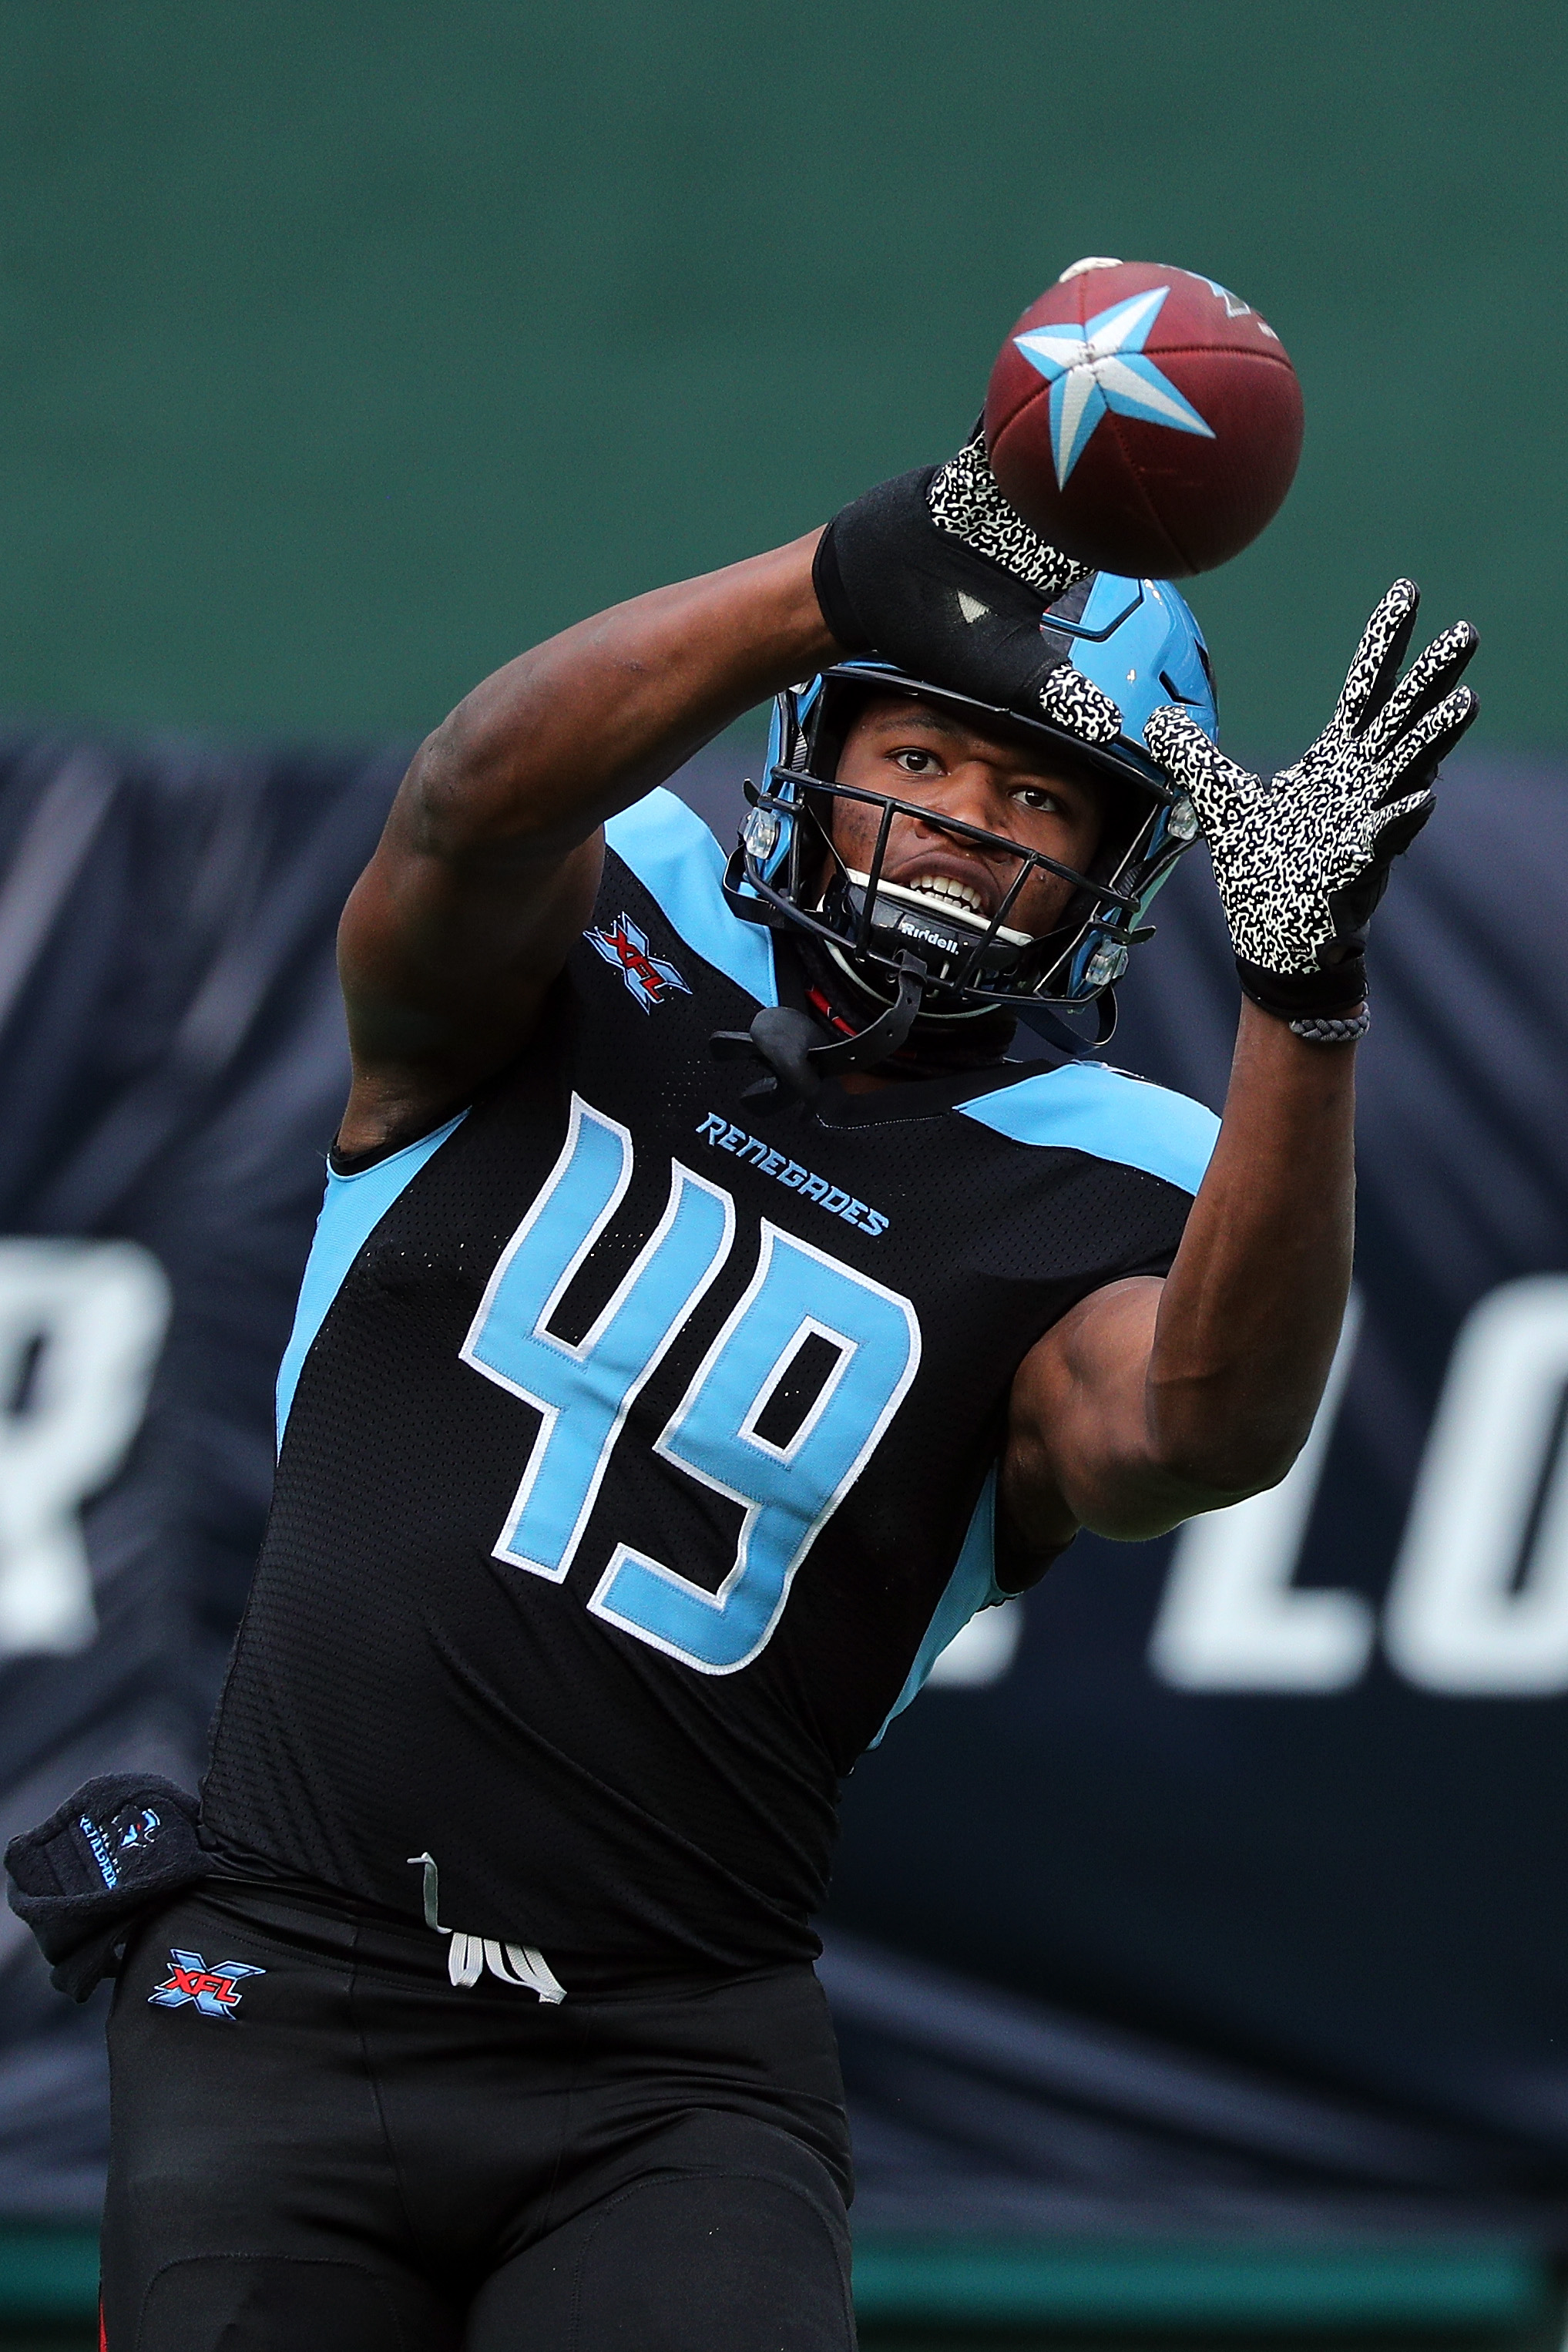 Donald Parham #49 of the Dallas Renegades catches a pass during warm ups before an XFL football game against the New York Guardians on March 07, 2020 in Arlington, Texas.